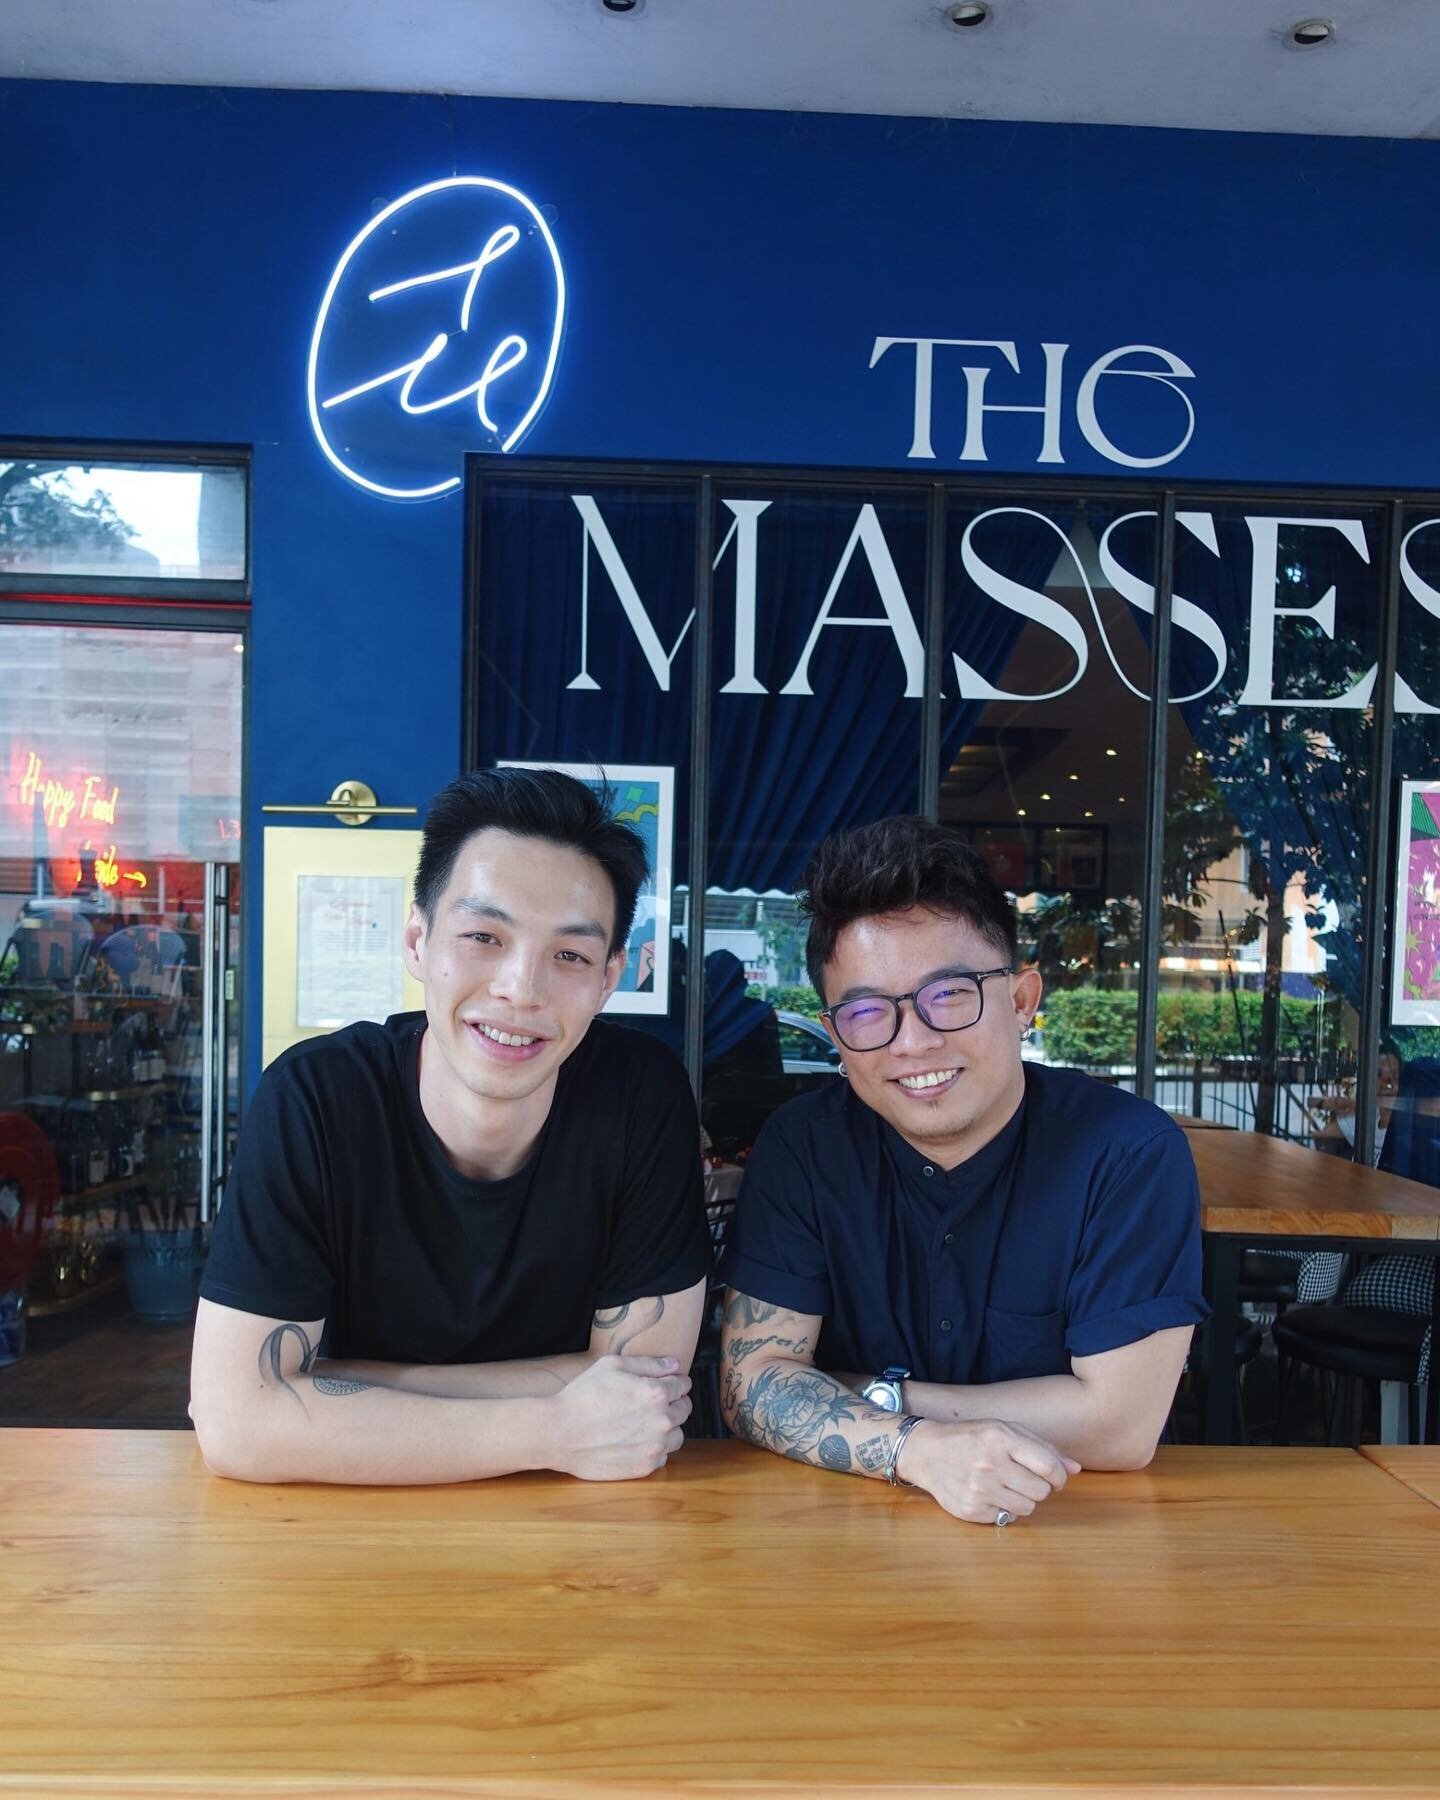 We are so happy and excited to be at the last weekend of @themassessg one month long anniversary. 29/04/23. Reservations can be made through @themassessg. See you there!

@dylannnnn